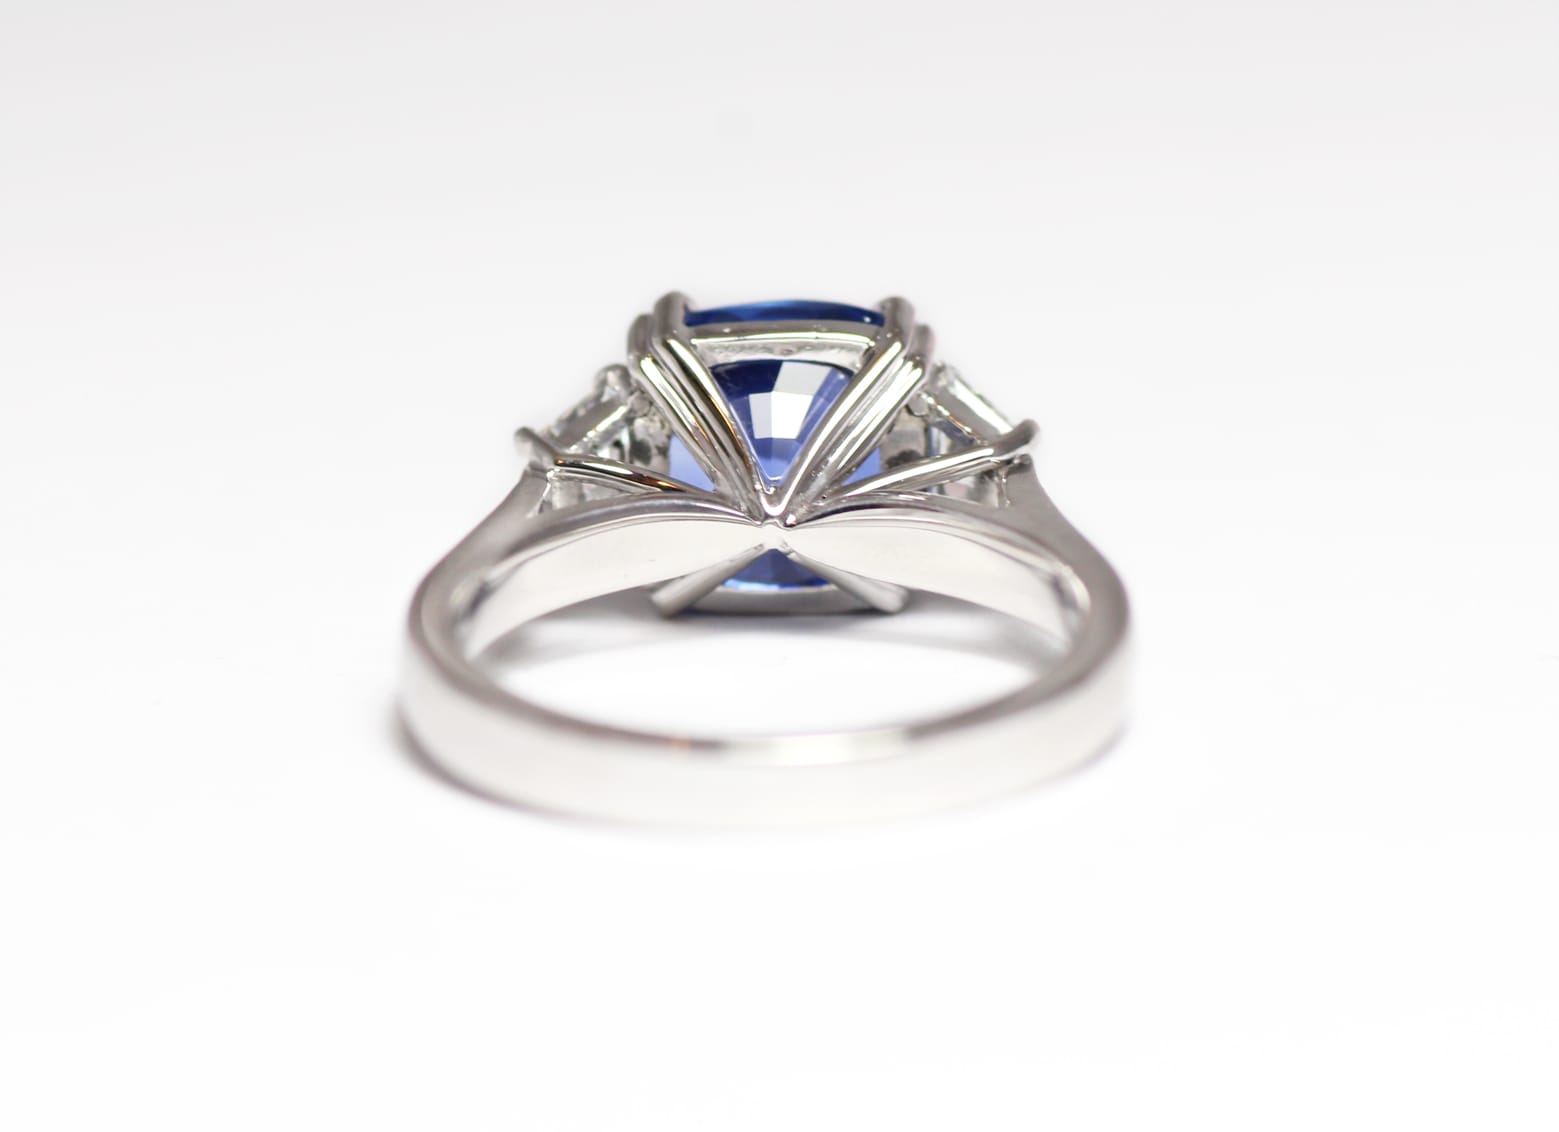 18ct Fairtrade white gold with ceylon sapphire and diamonds by Zoe Pook Jewellery